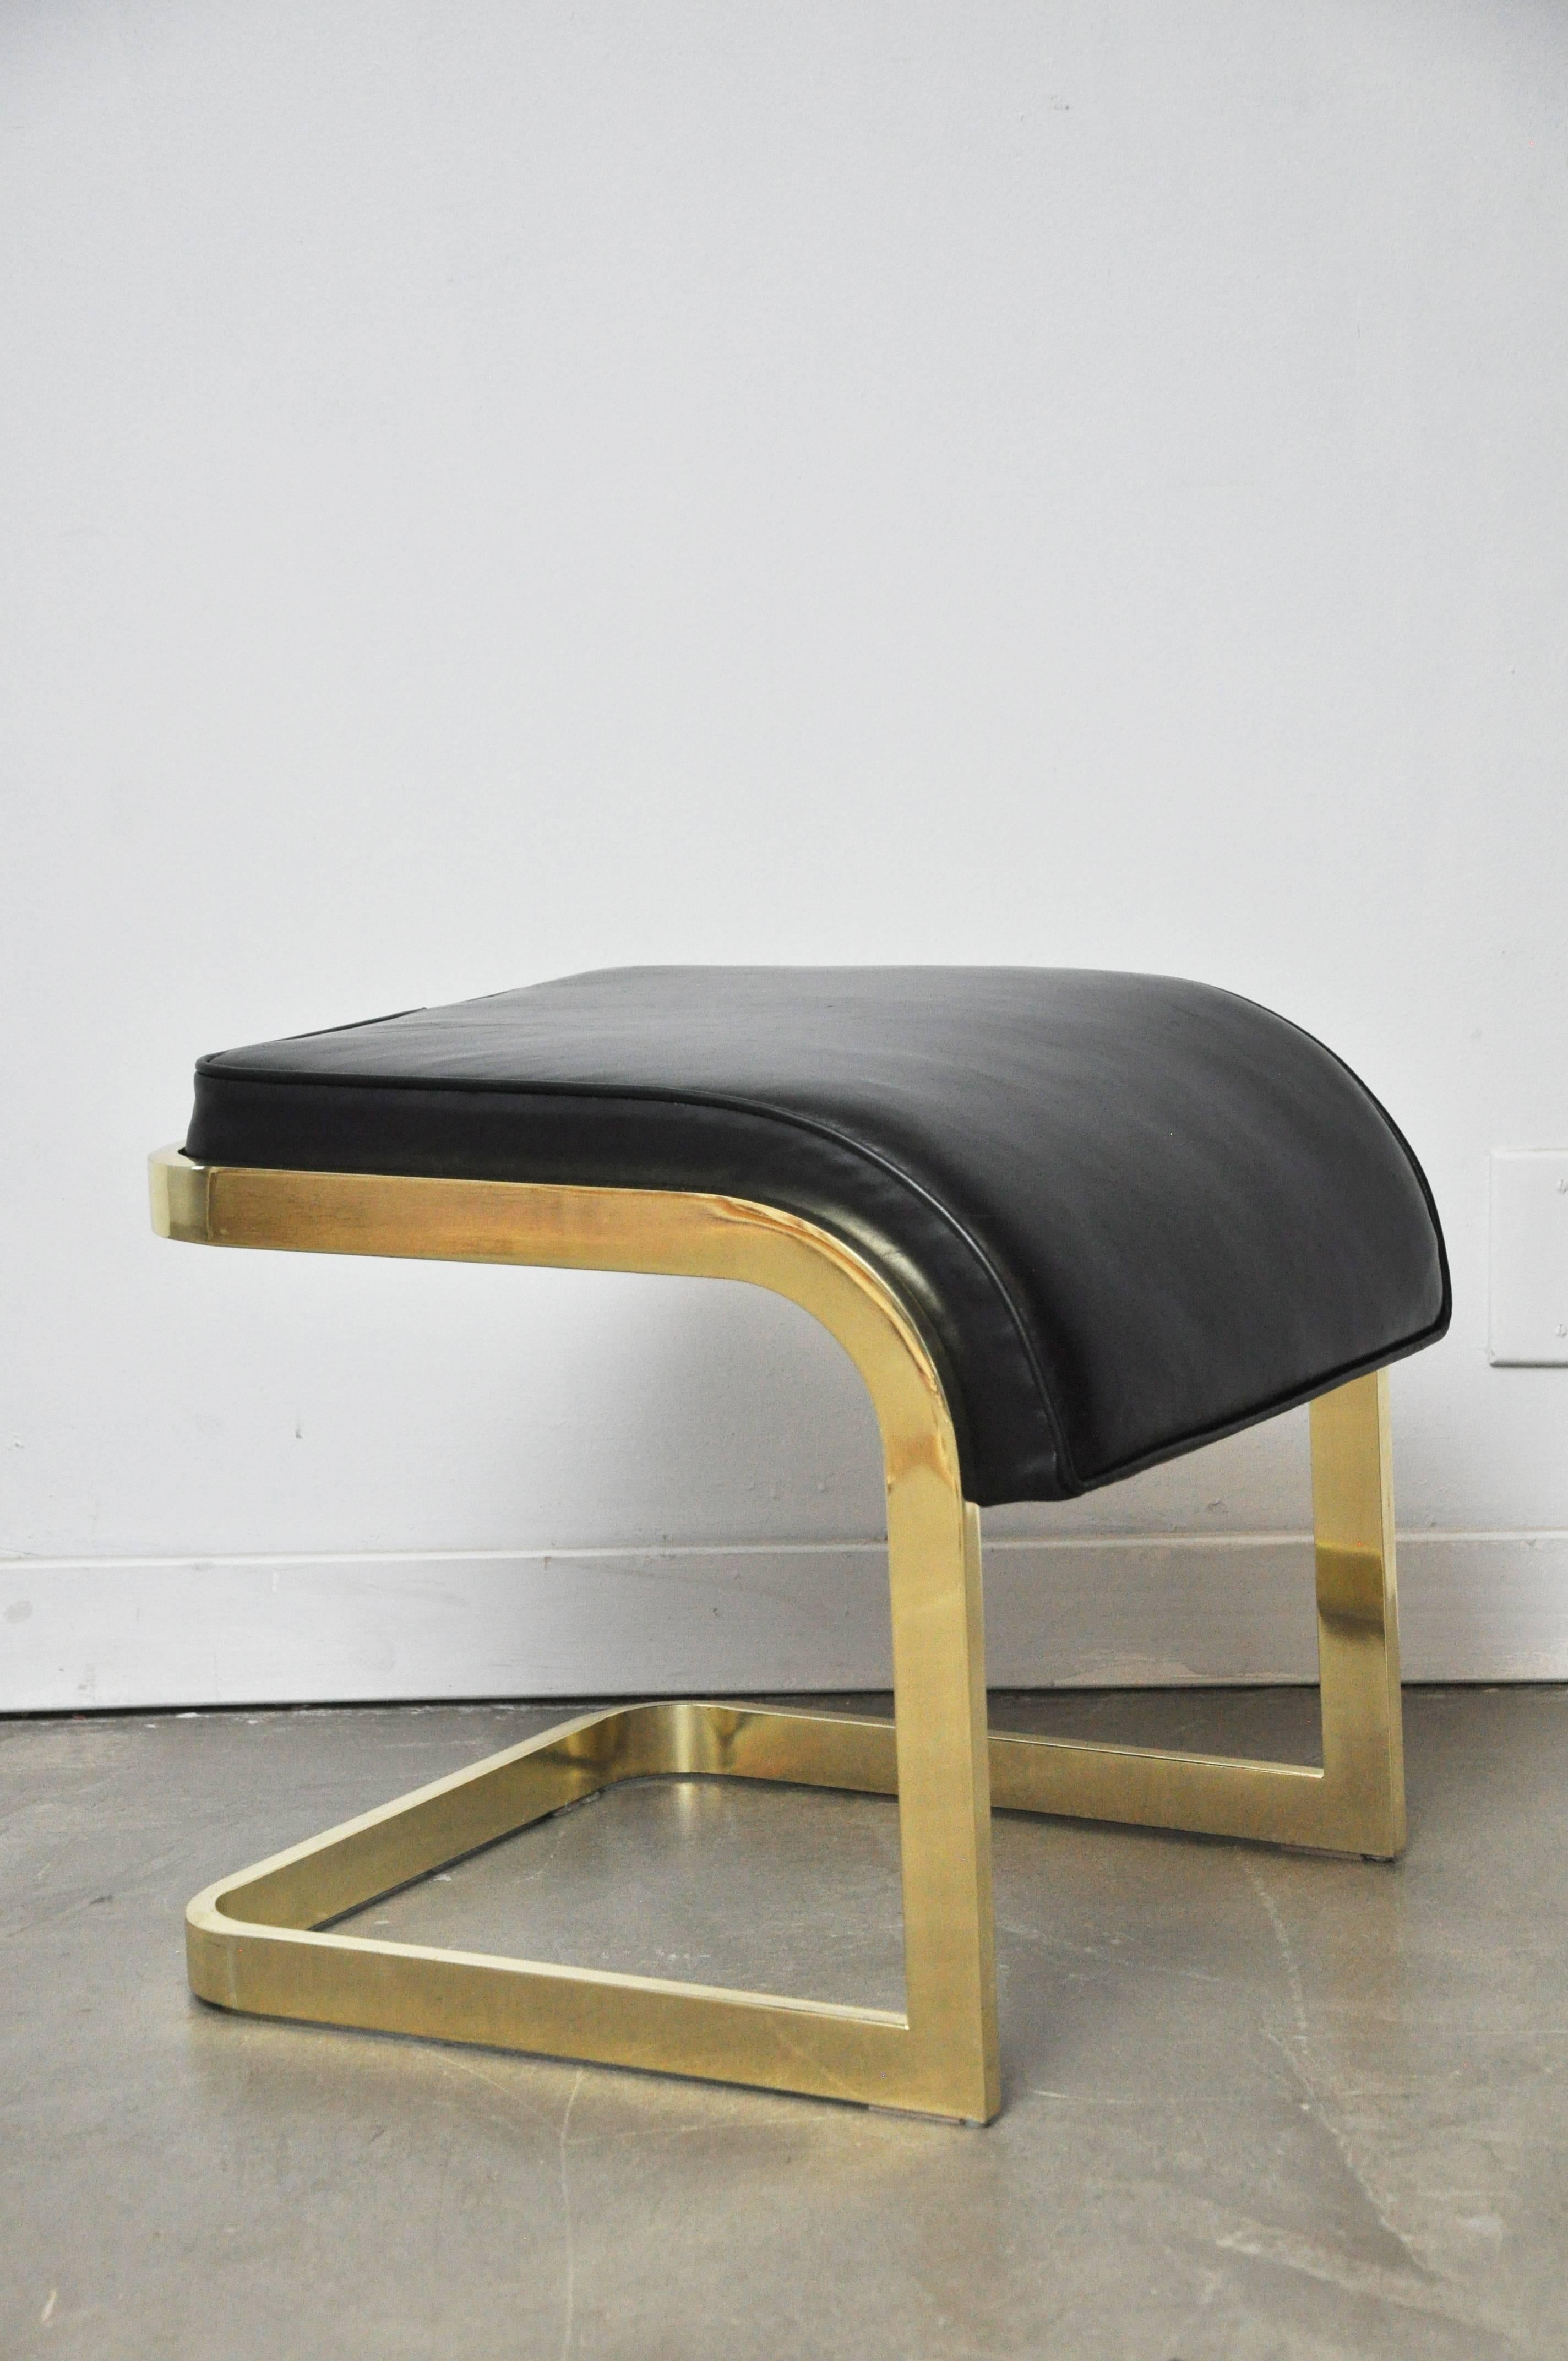 Pair of brass frame stools with new black leather cushions. Design Institute, circa 1970s.